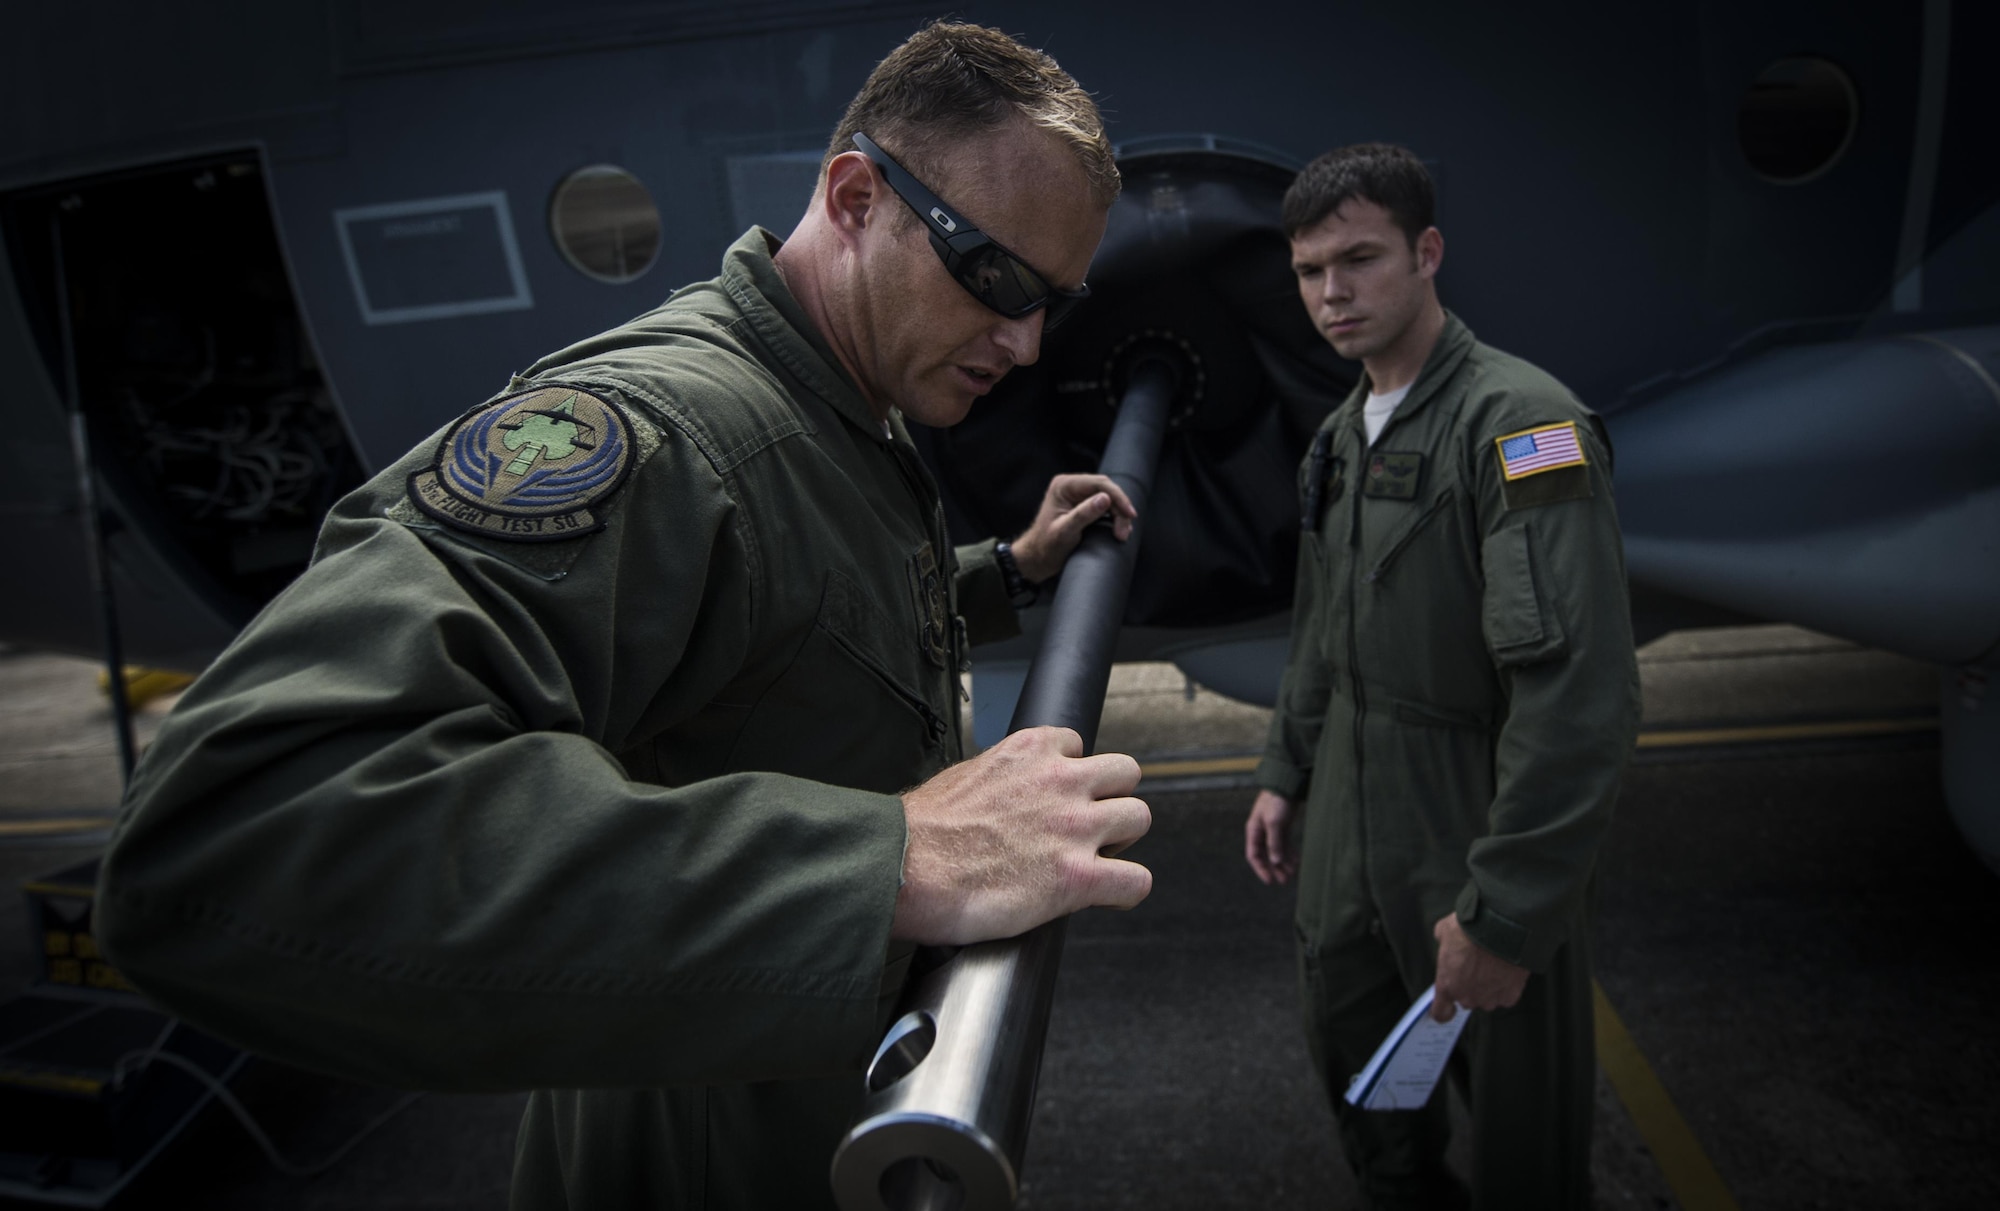 Master Sgt. James Knight left, 18th Flight Test Squadron aerial gunner, performs a pre-flight inspection with Staff Sgt. Rob Turner right, 1st Special Operations Group Detachment 2 aerial gunner, on Eglin Air Force Base, Fla., July 29, 2015. The aircrews of the 1st SOG Det. 2 were hand selected from the AC-130 community for their operational expertise and will begin initial operational testing and evaluation of the AC-130J later this year. (U.S. Air Force photo/Senior Airman Christopher Callaway)